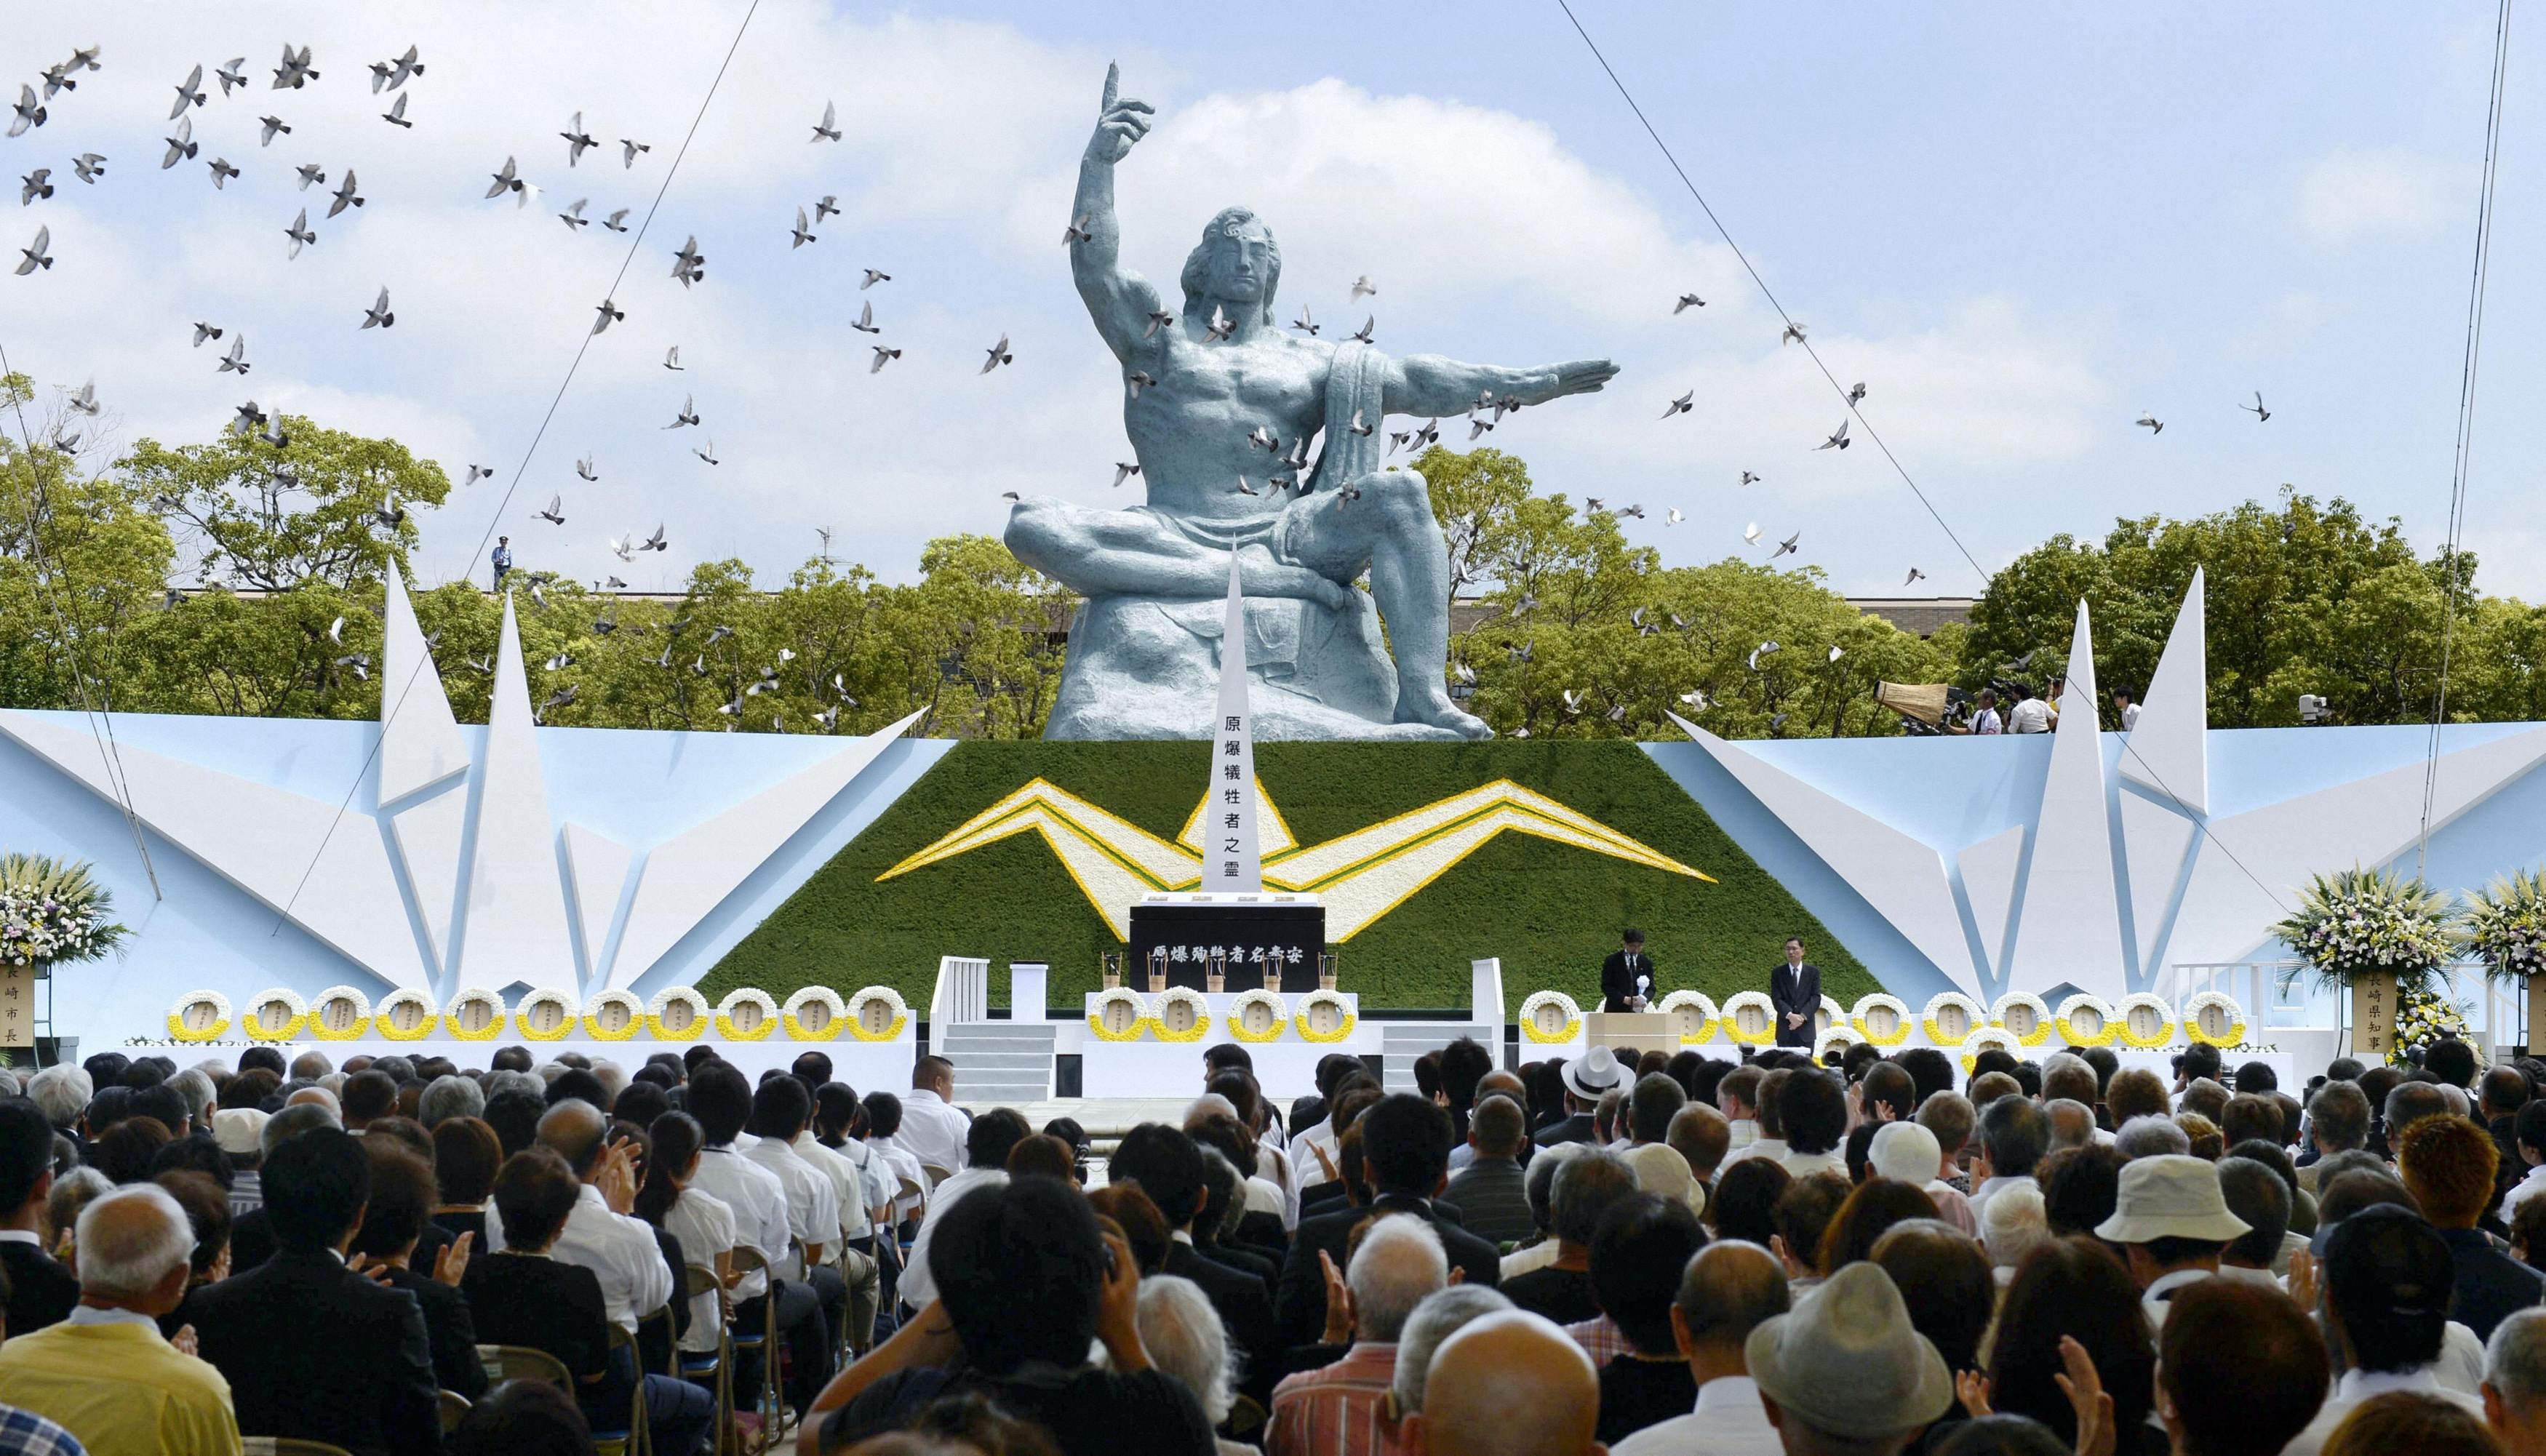 Doves fly near the Peace Statue in Nagasaki's Peace Park during a ceremony commemorating the 68th anniversary of the bombing